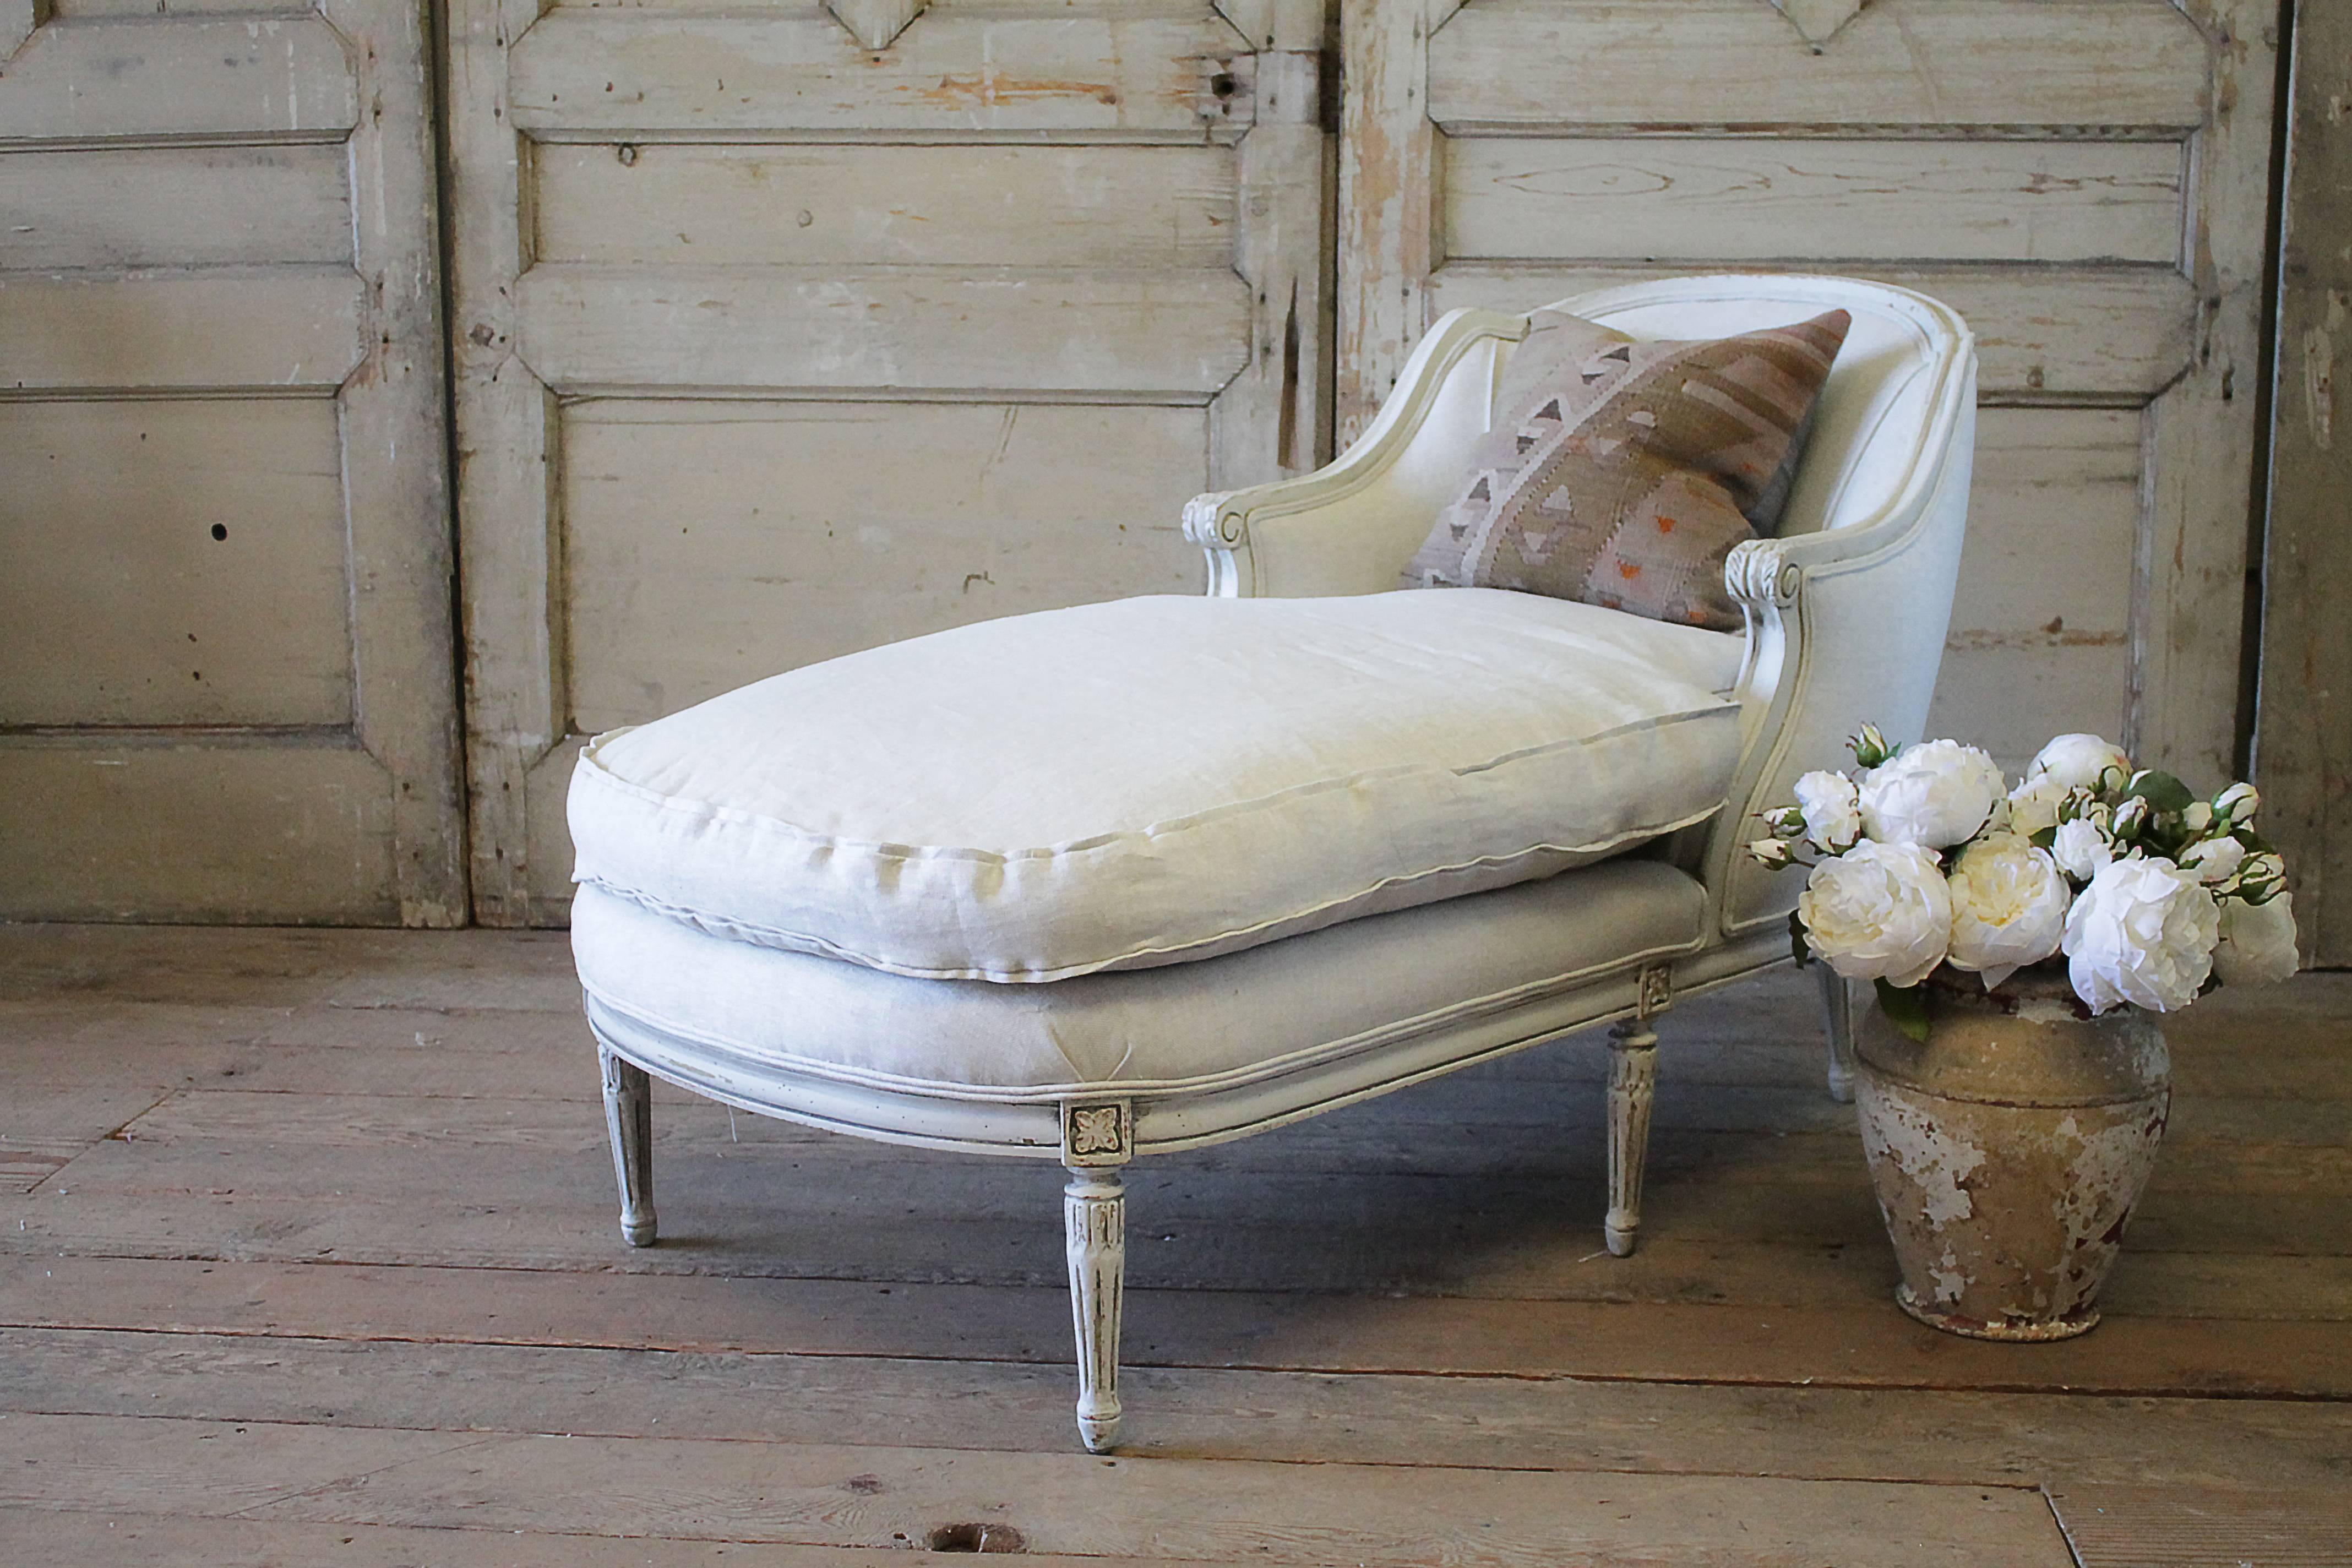 Antique chaise longue has been painted in our oyster white finish. Our finish has a slight greyish tone, with subtle distressed edges, and finished with an antique glazed patina.
Reupholstered in a natural Belgian linen, finished with a double welt